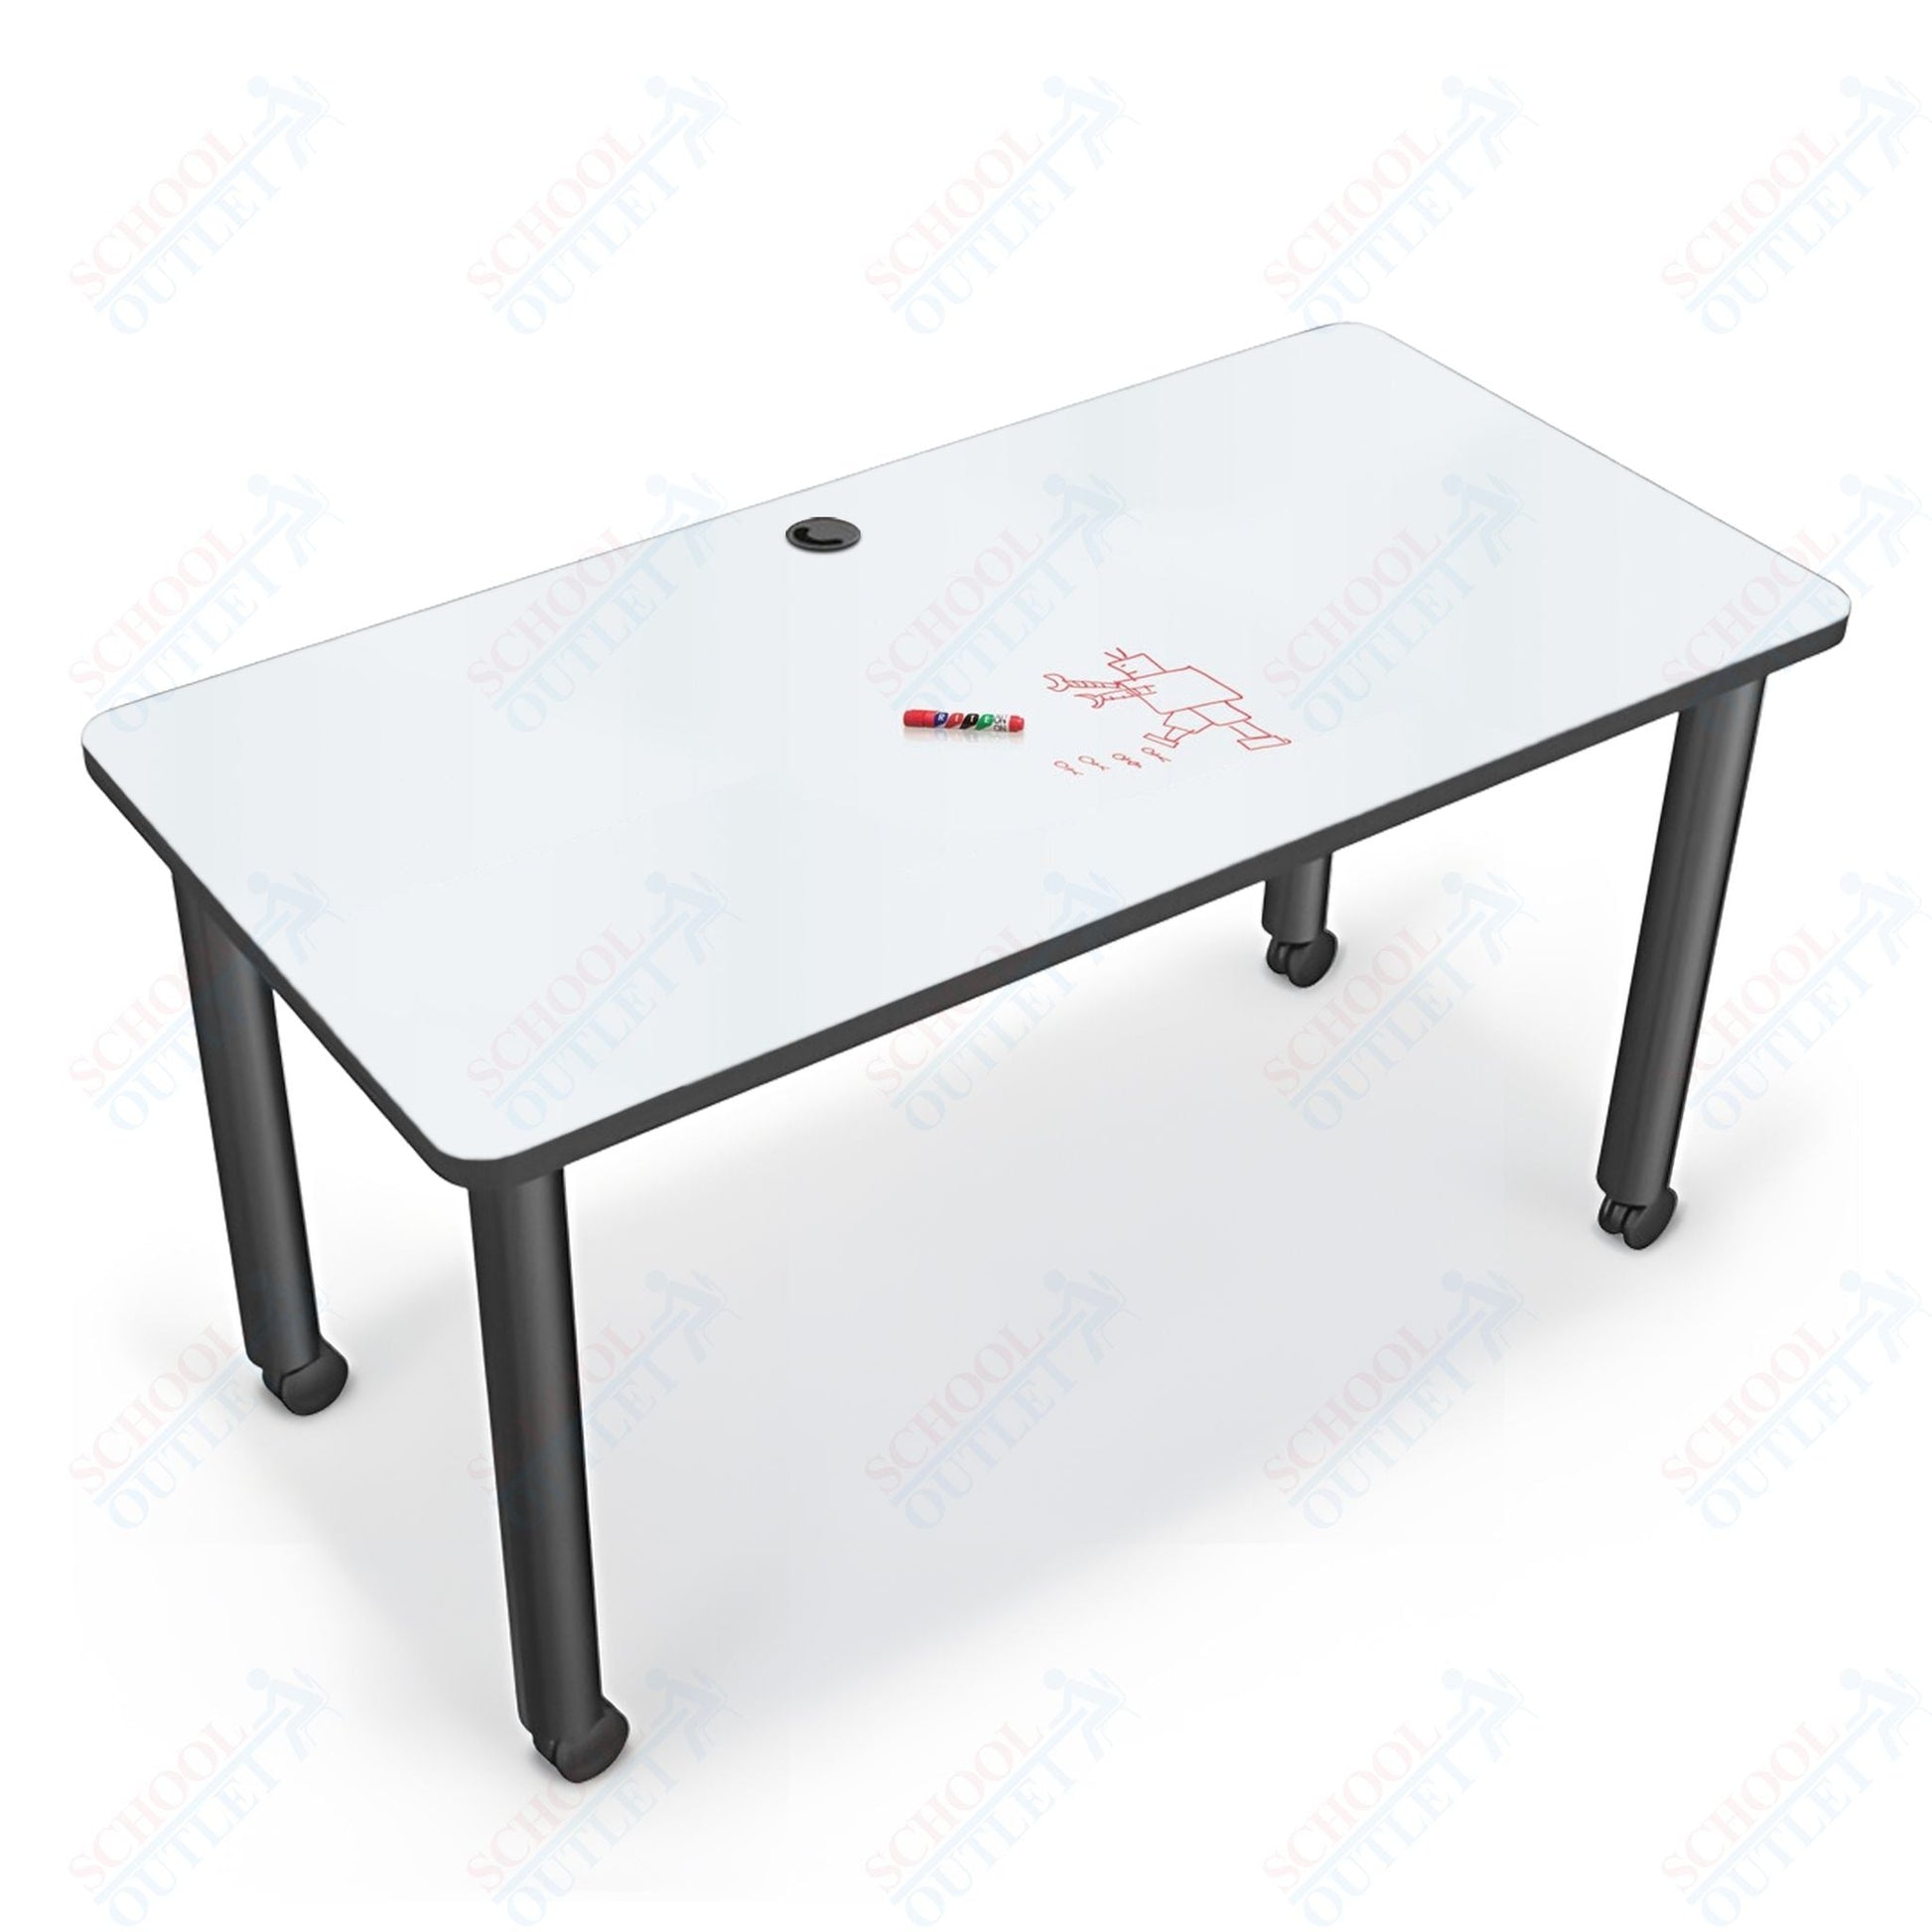 Mooreco Modular Conference Table - Rectangle - 58"W x 29"D - Black Edgeband (Mooreco 27742) - SchoolOutlet